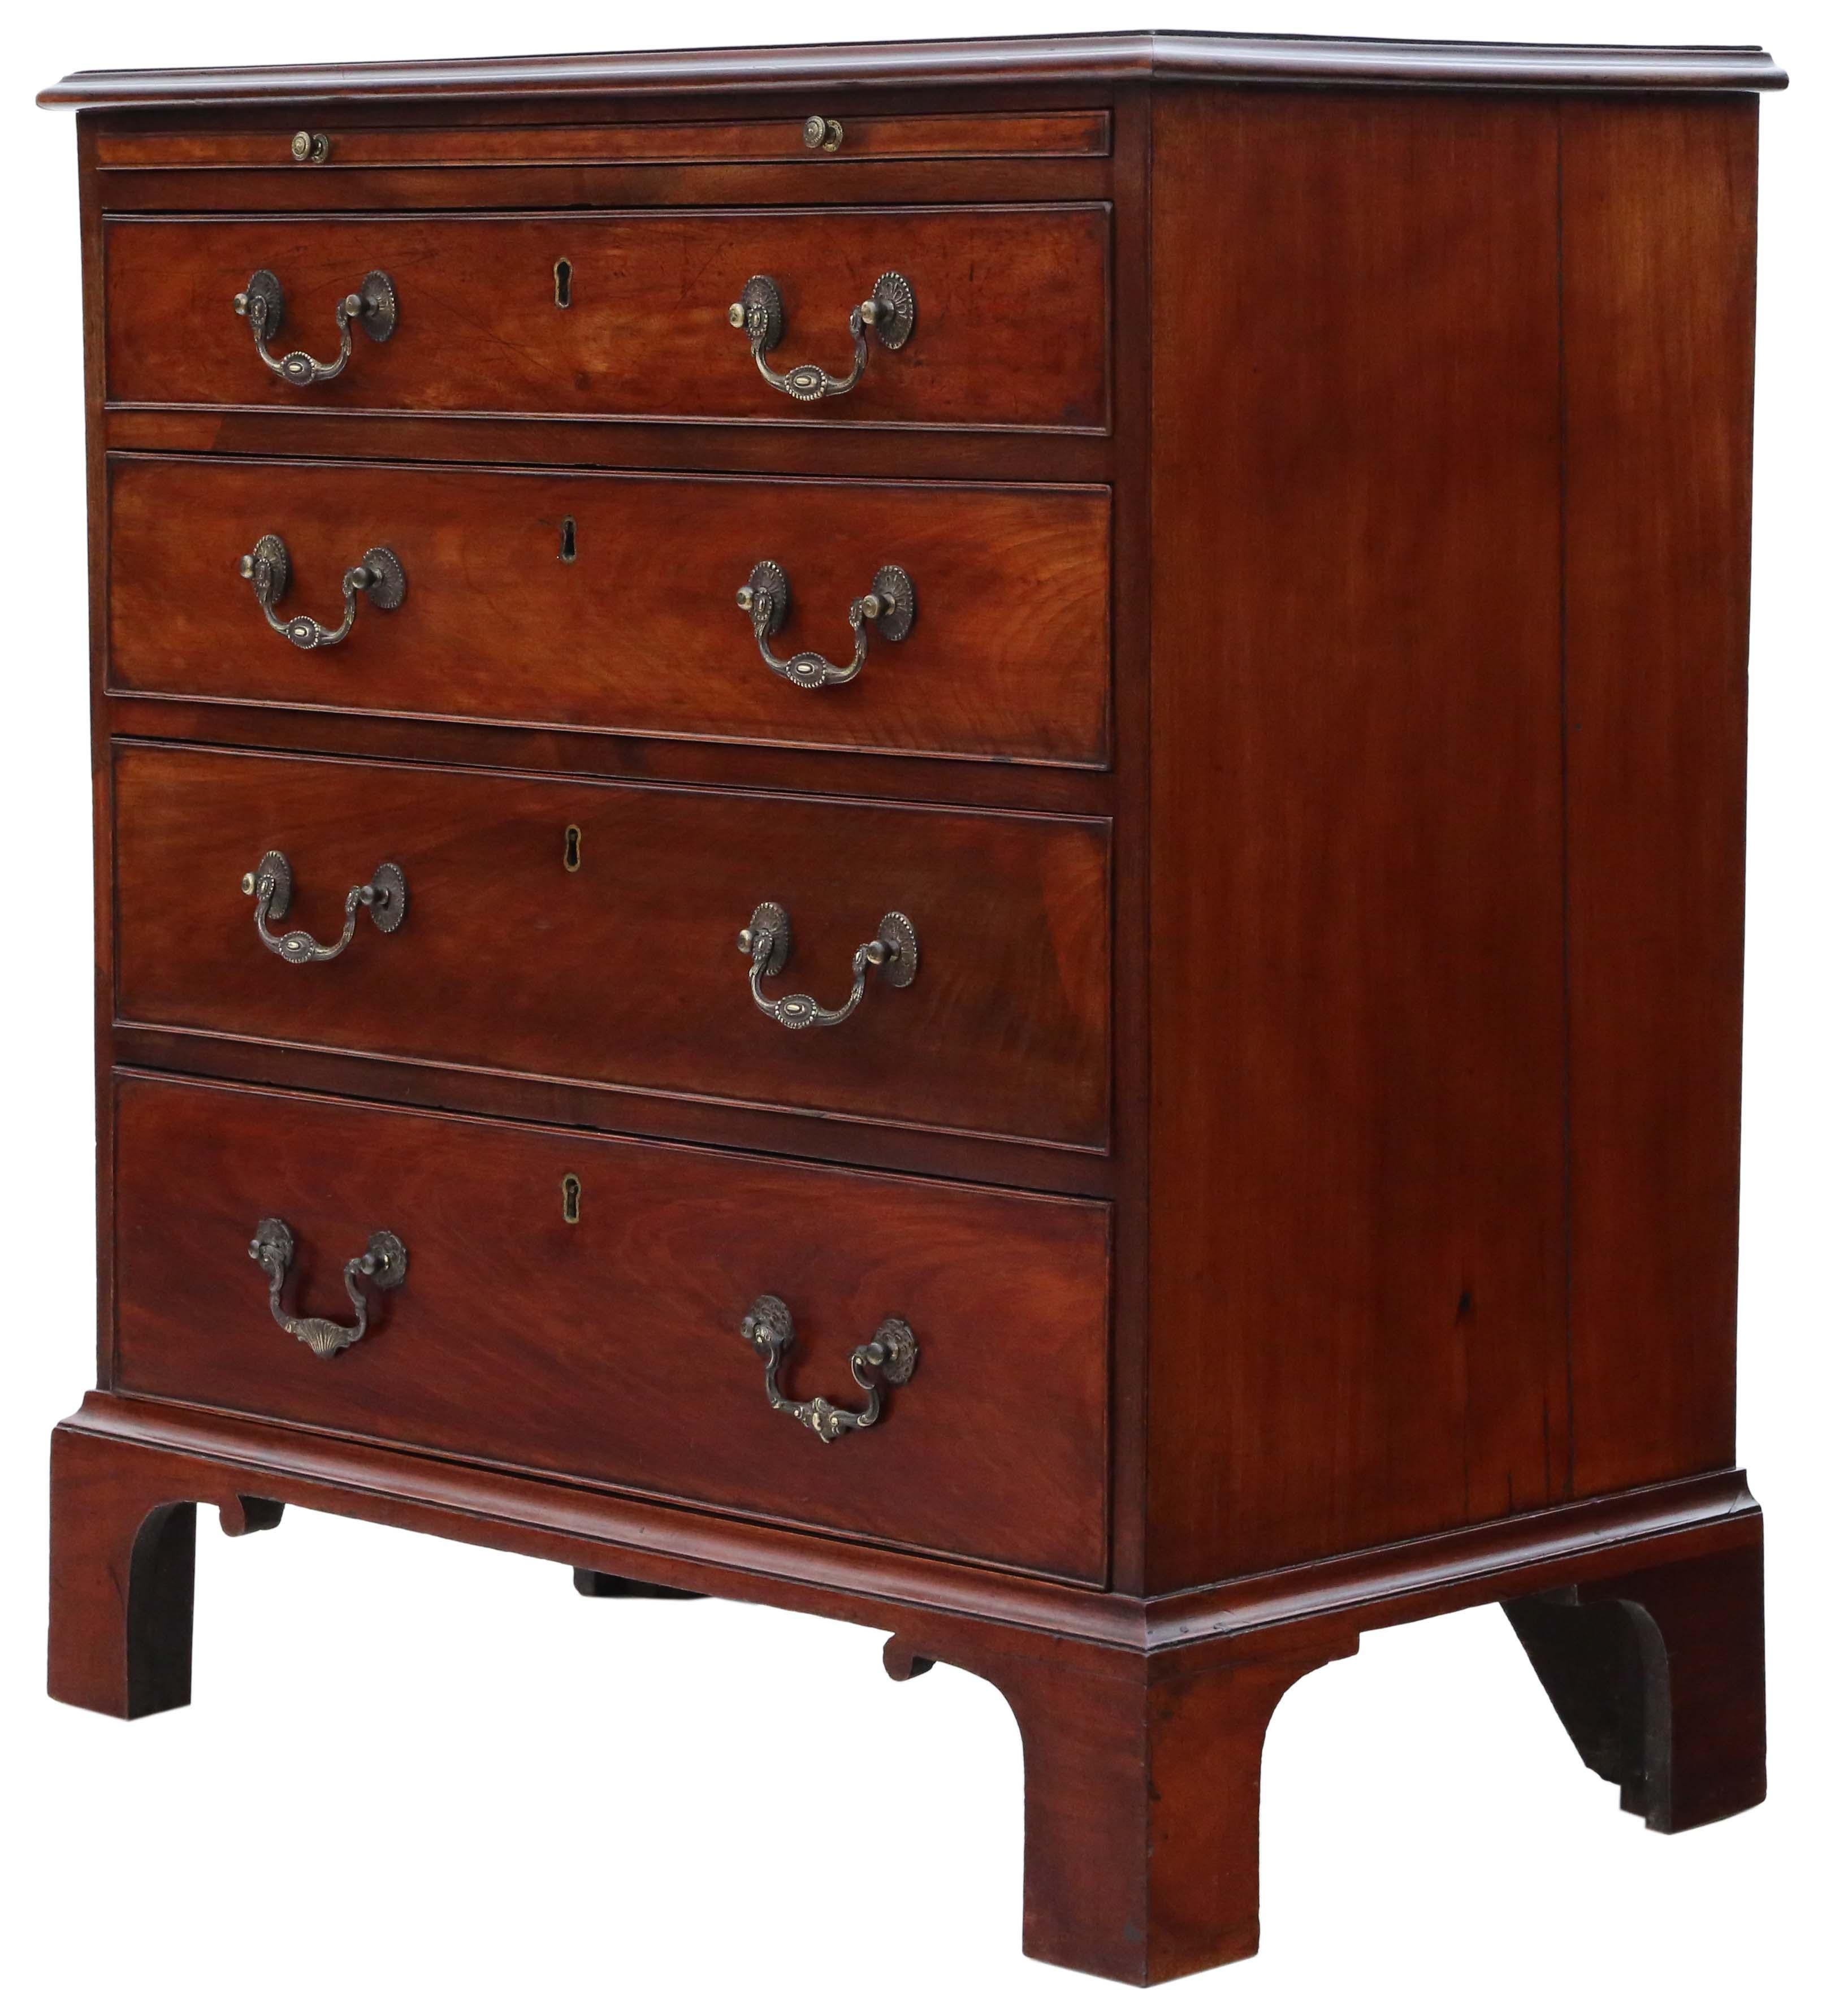 Antique fine quality Georgian 18th Century mahogany batchelors chest of drawers In Good Condition For Sale In Wisbech, Cambridgeshire